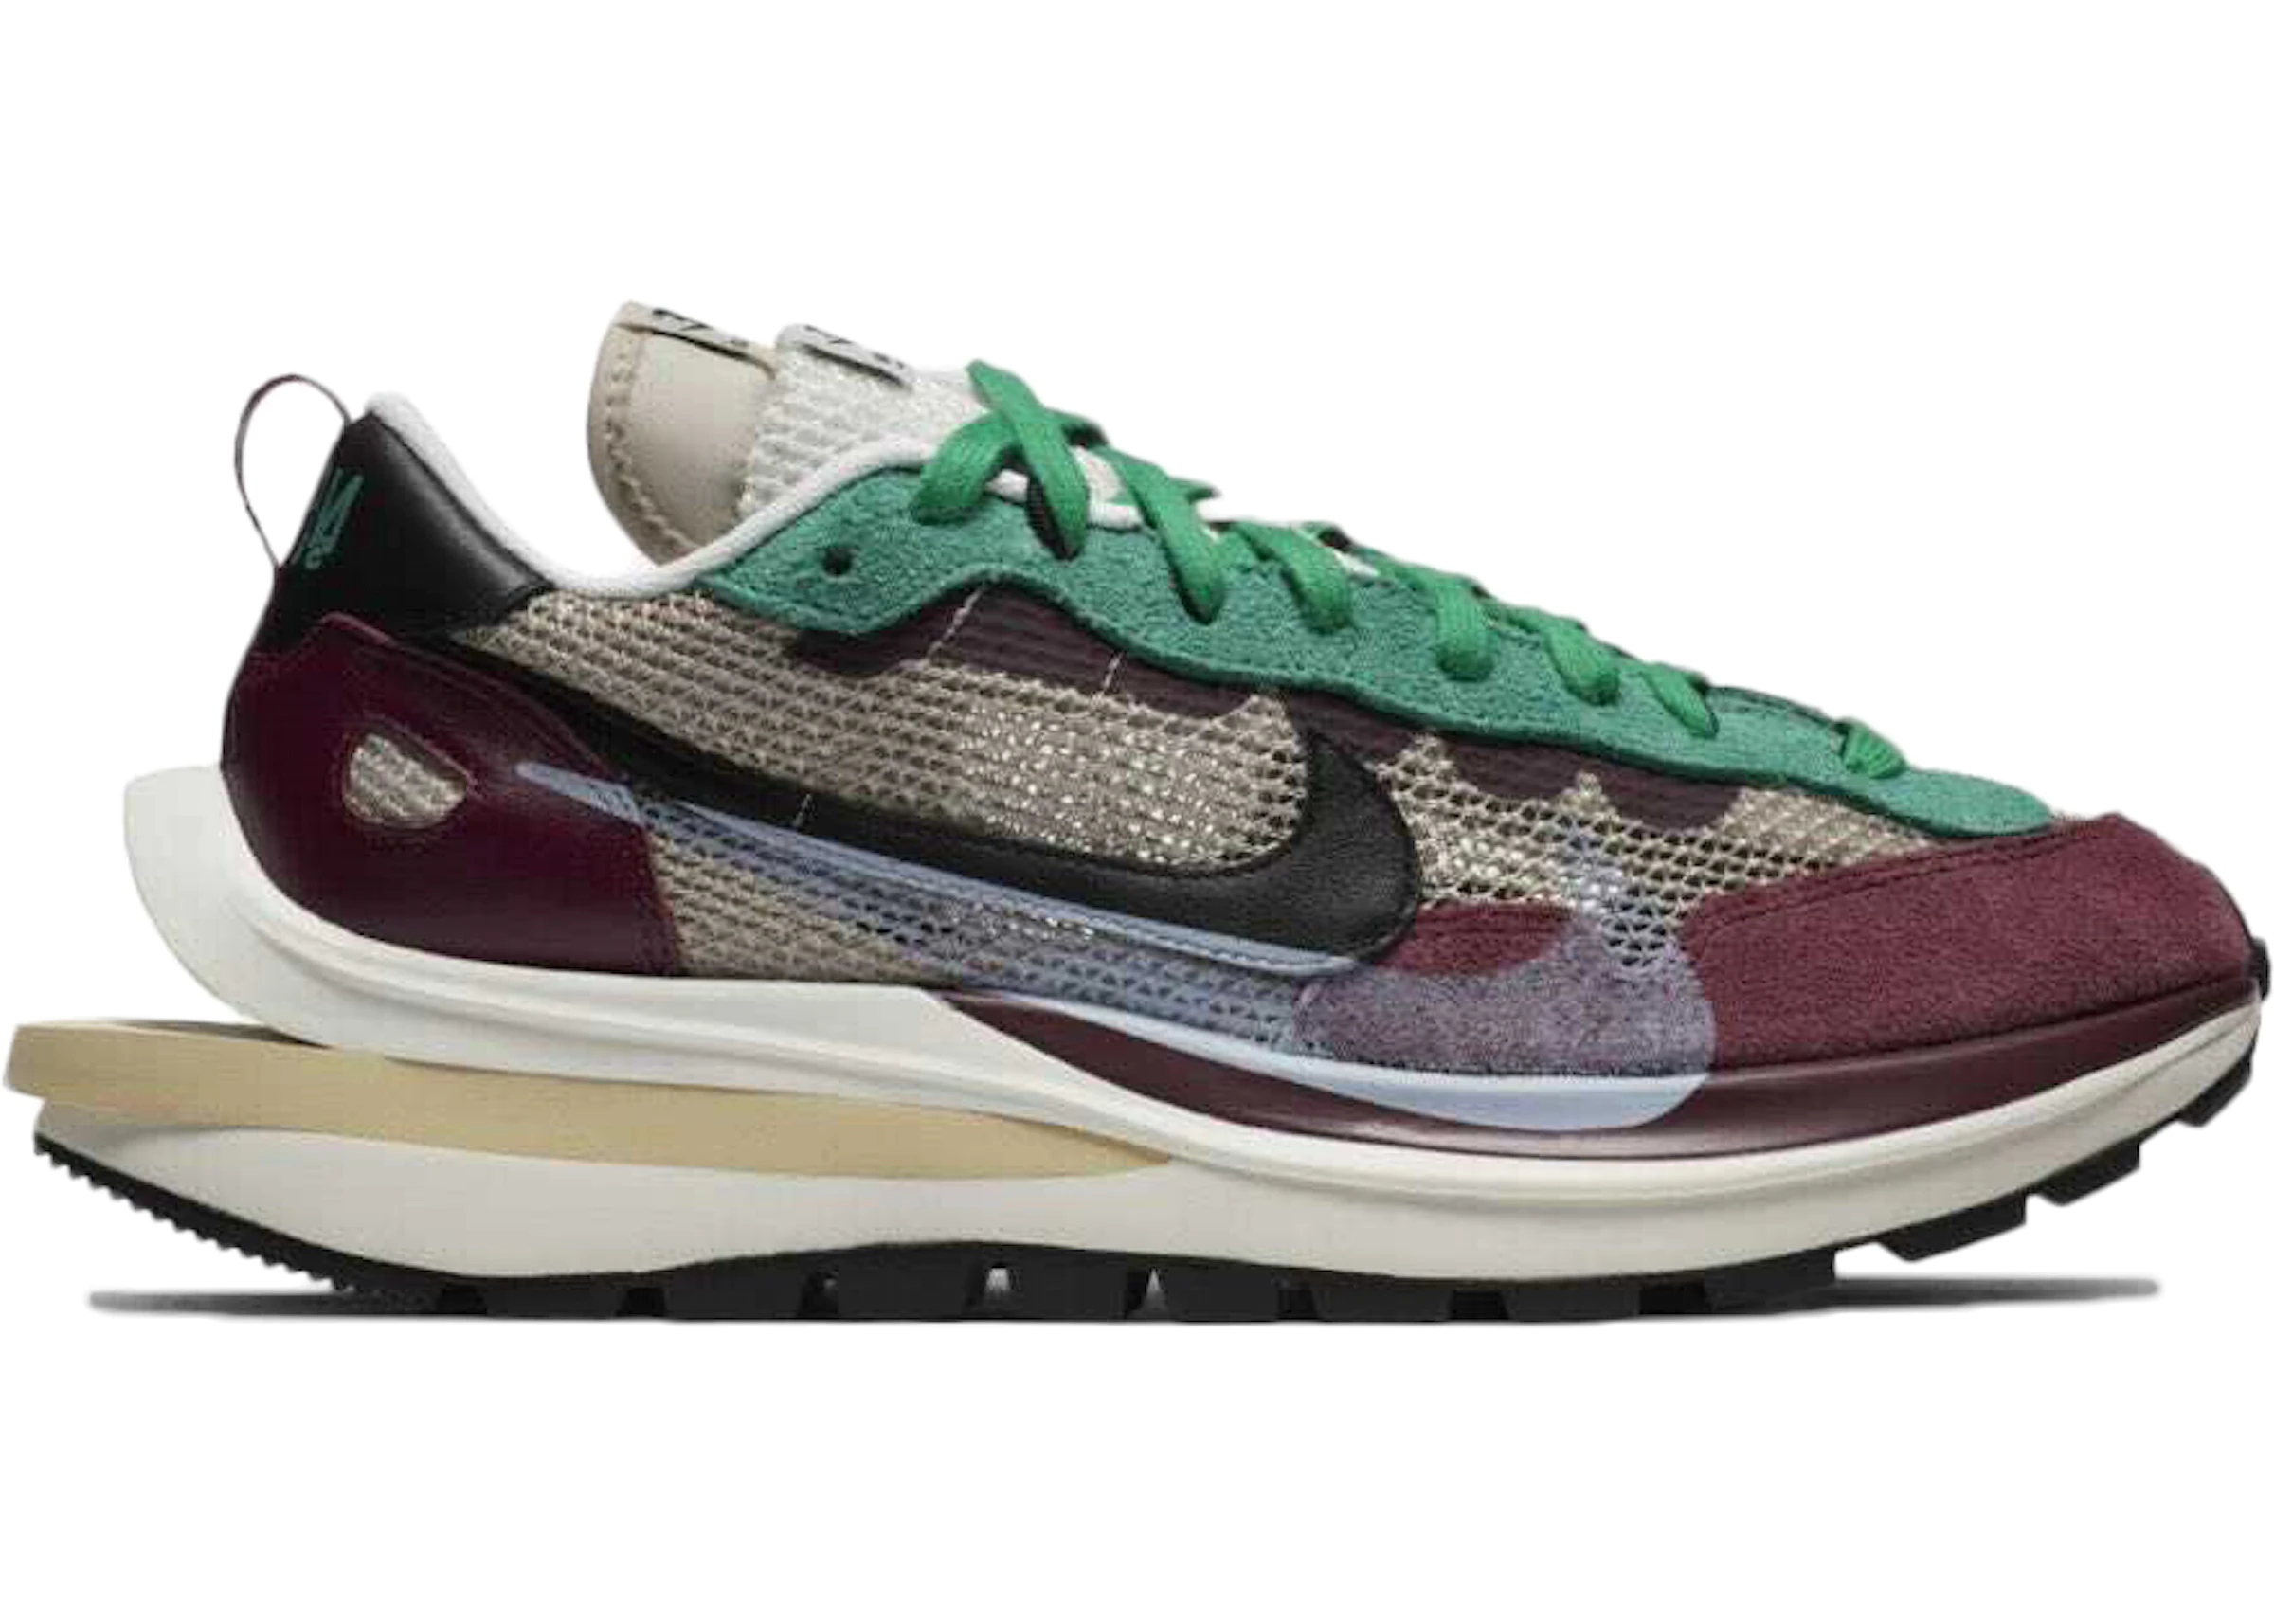 Buy Nike Sacai Waffle Size 12 Shoes & New Sneakers - StockX